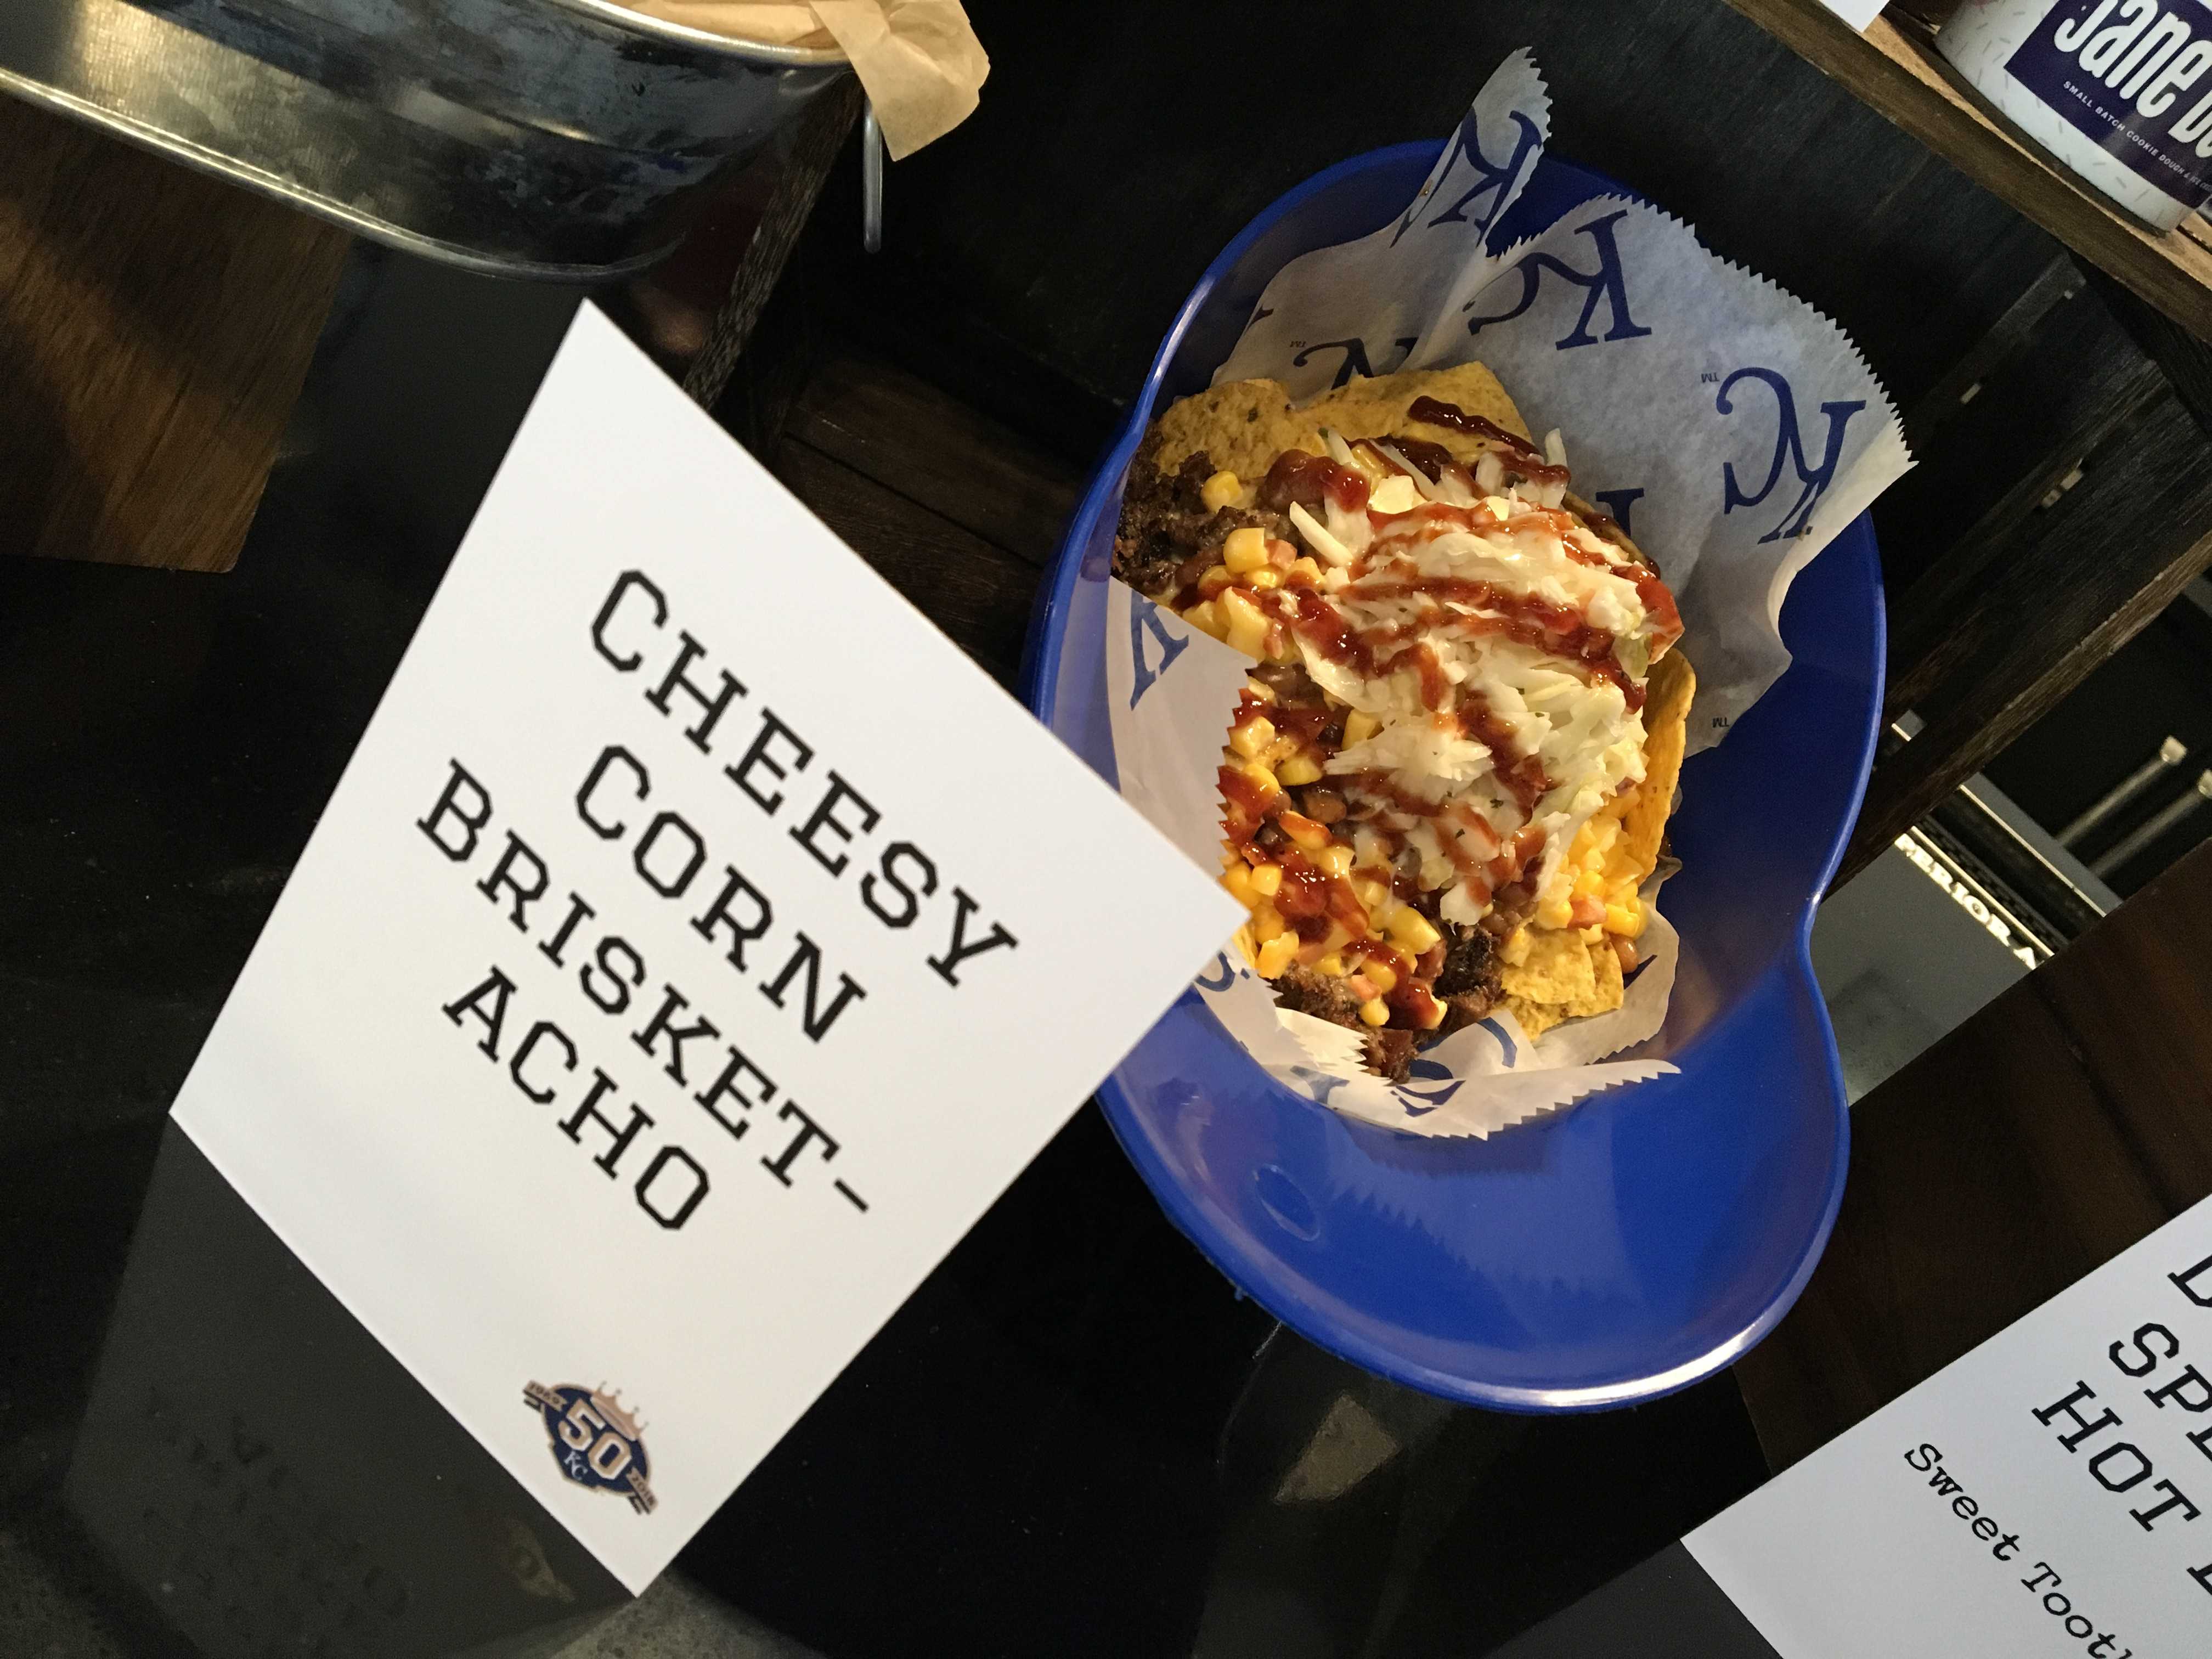 Where to Eat at Kauffman Stadium, Home of the Kansas City Royals - Eater